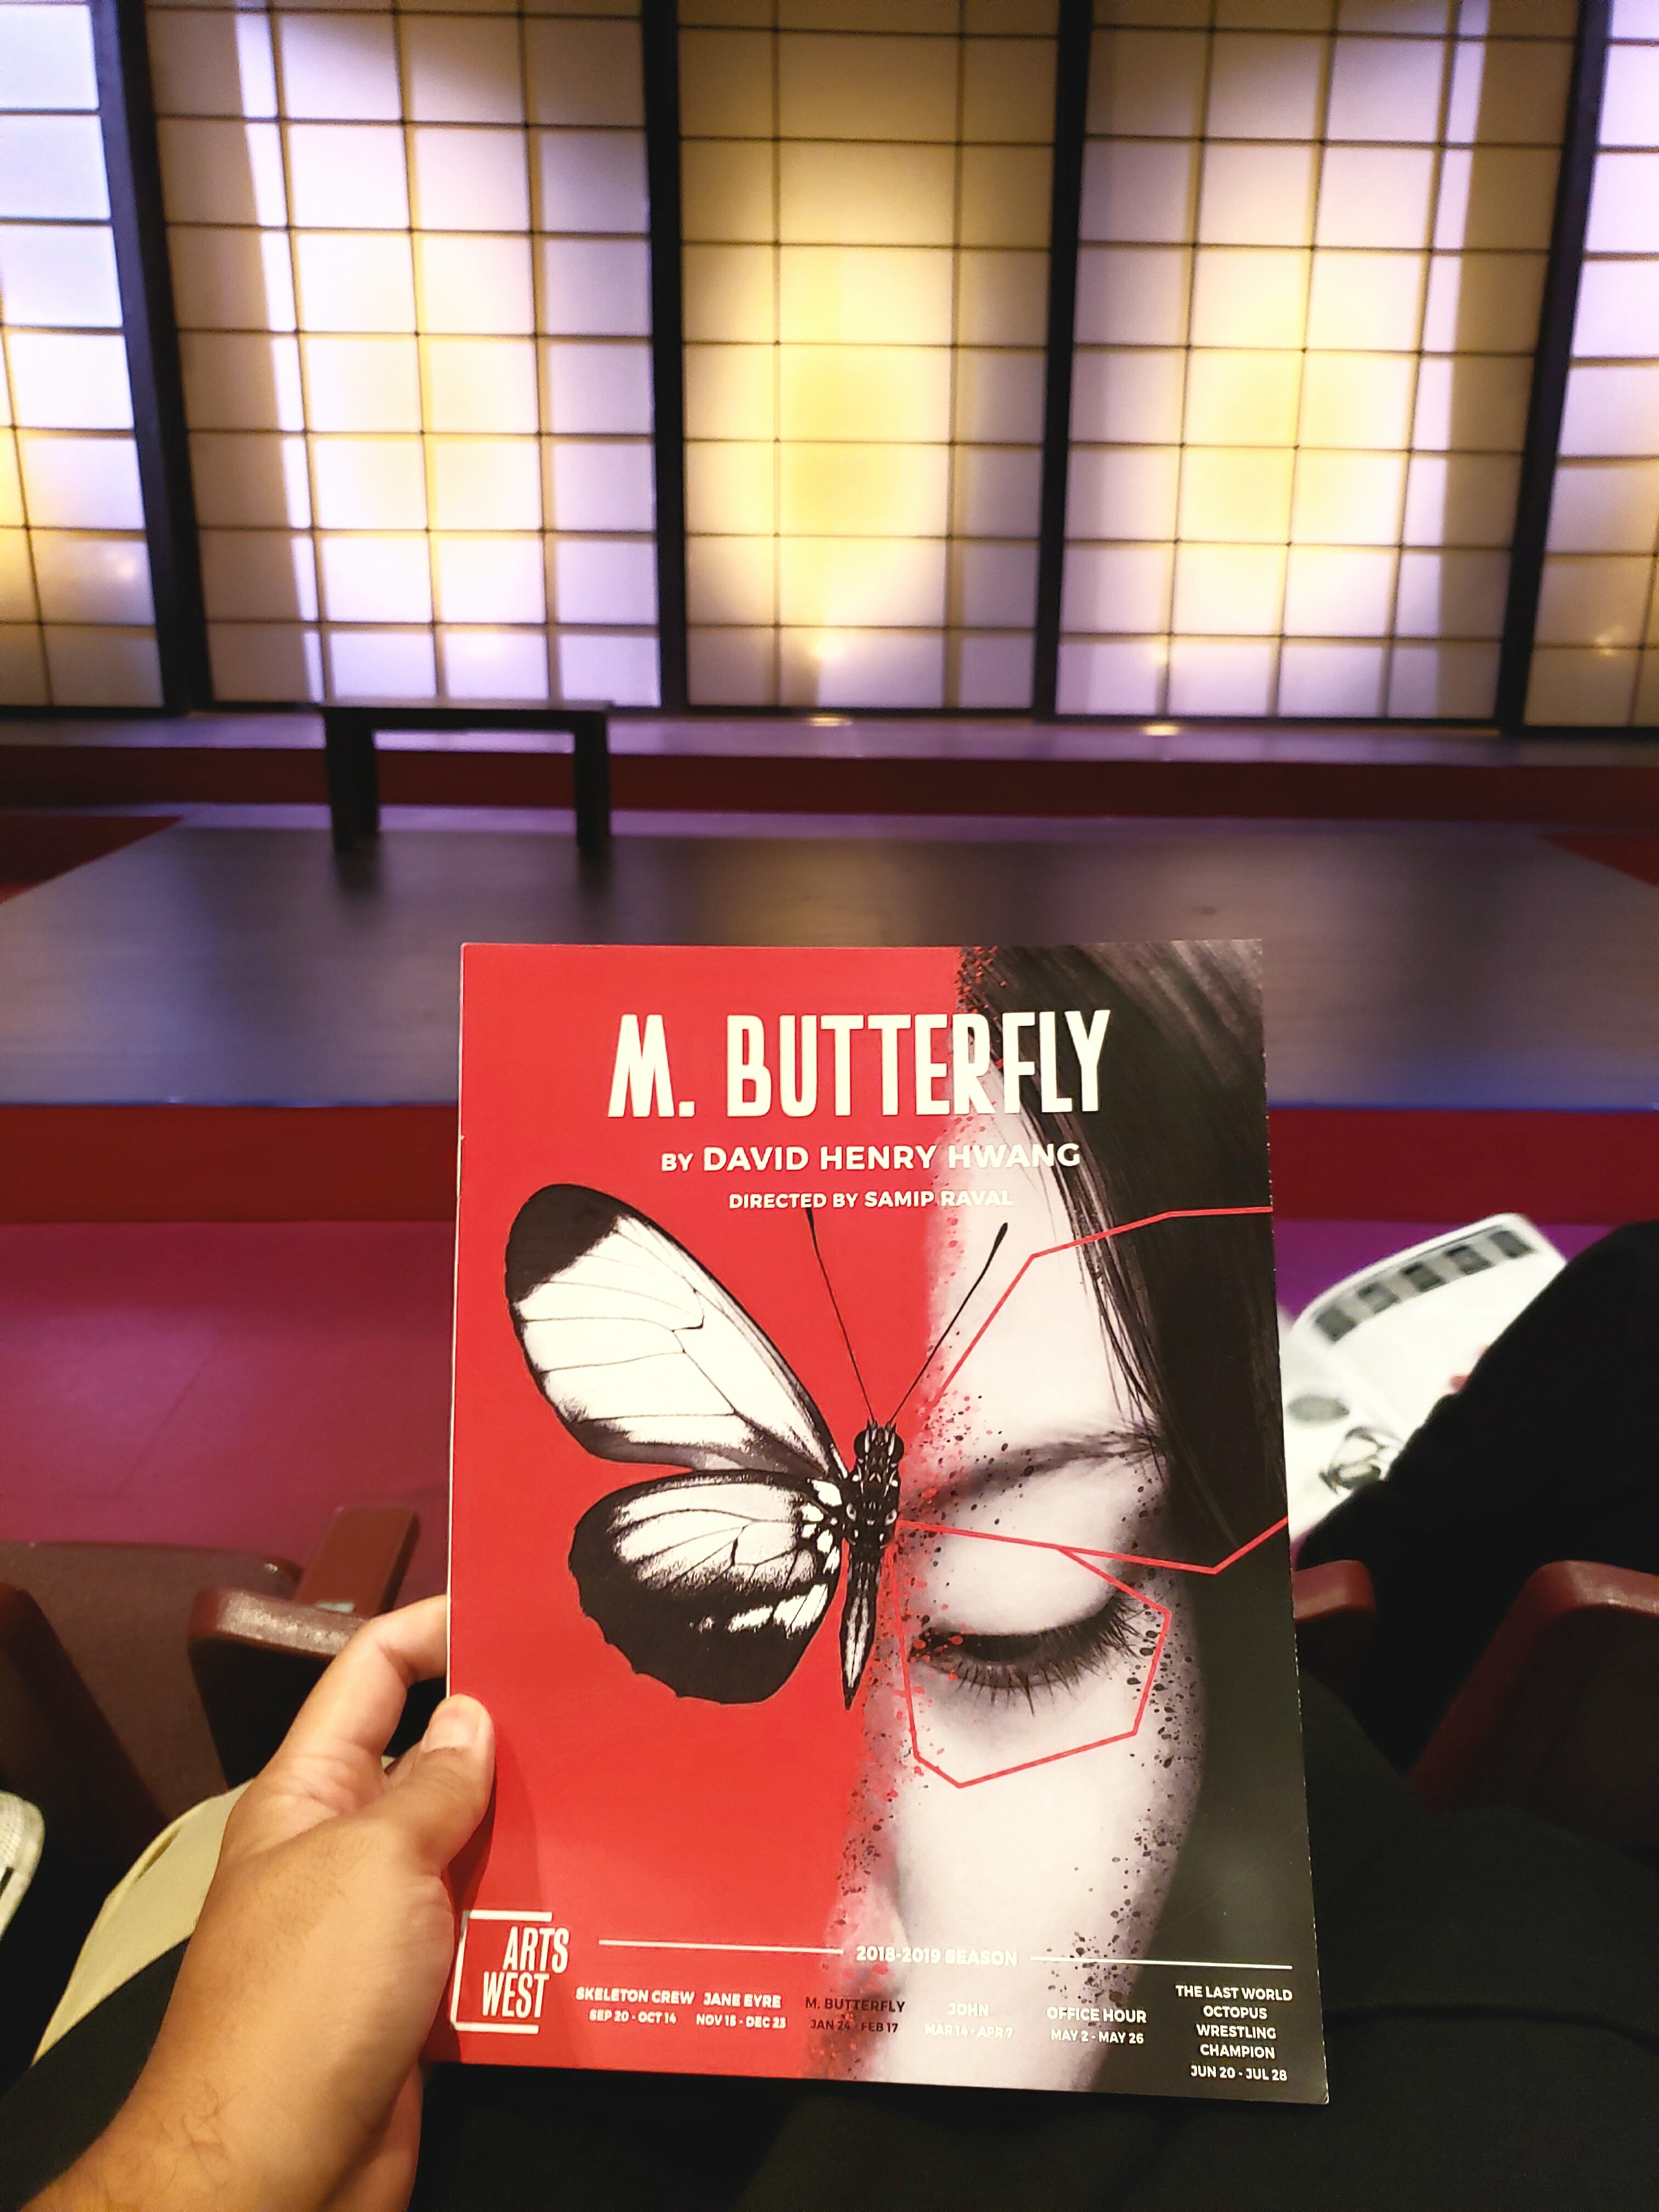 #Riveting Tony Awards-winning #play M. Butterfly. #Multilayered commentary on #gender/#sexual conformity, #Asian #racial stereotypes, & #east vs #west. A #Seattle play finally uses #nudity constructively. #madameButterfly